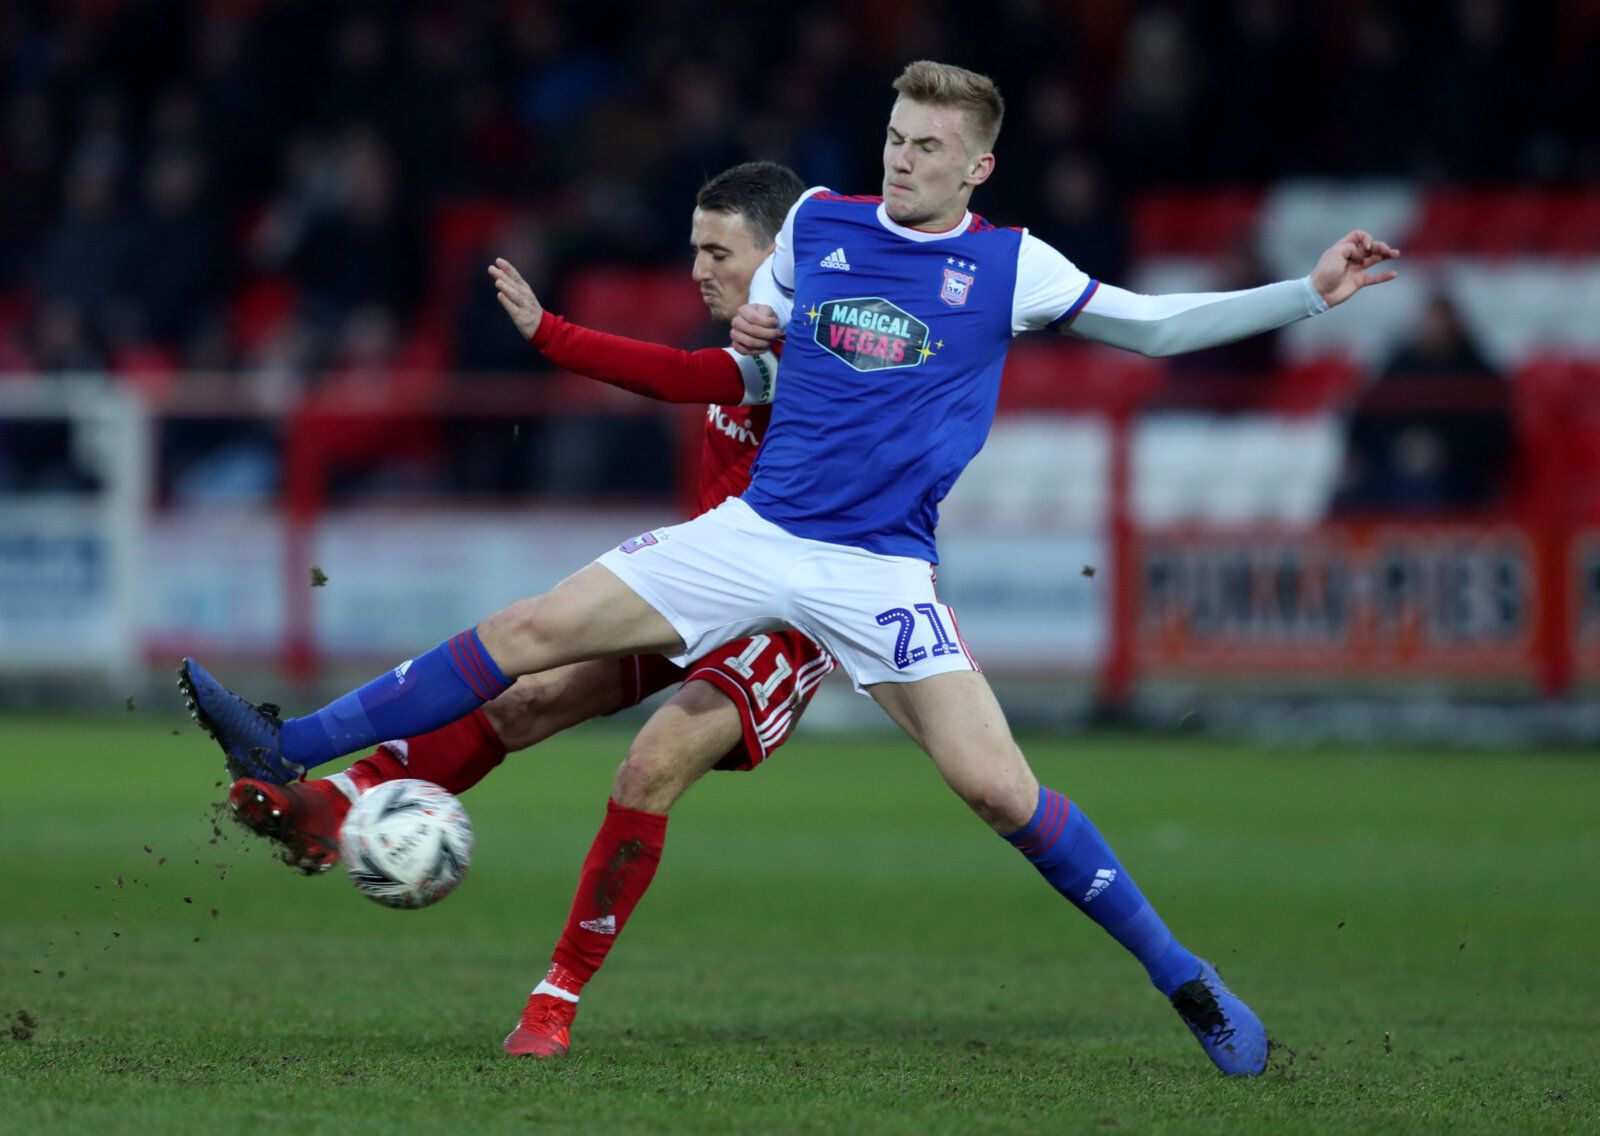 Soccer Football - FA Cup Third Round - Accrington Stanley v Ipswich Town - Wham Stadium, Accrington, Britain - January 5, 2019  Accrington Stanley's Sean McConville in action with Ipswich Town's Flynn Downes      Action Images/John Clifton